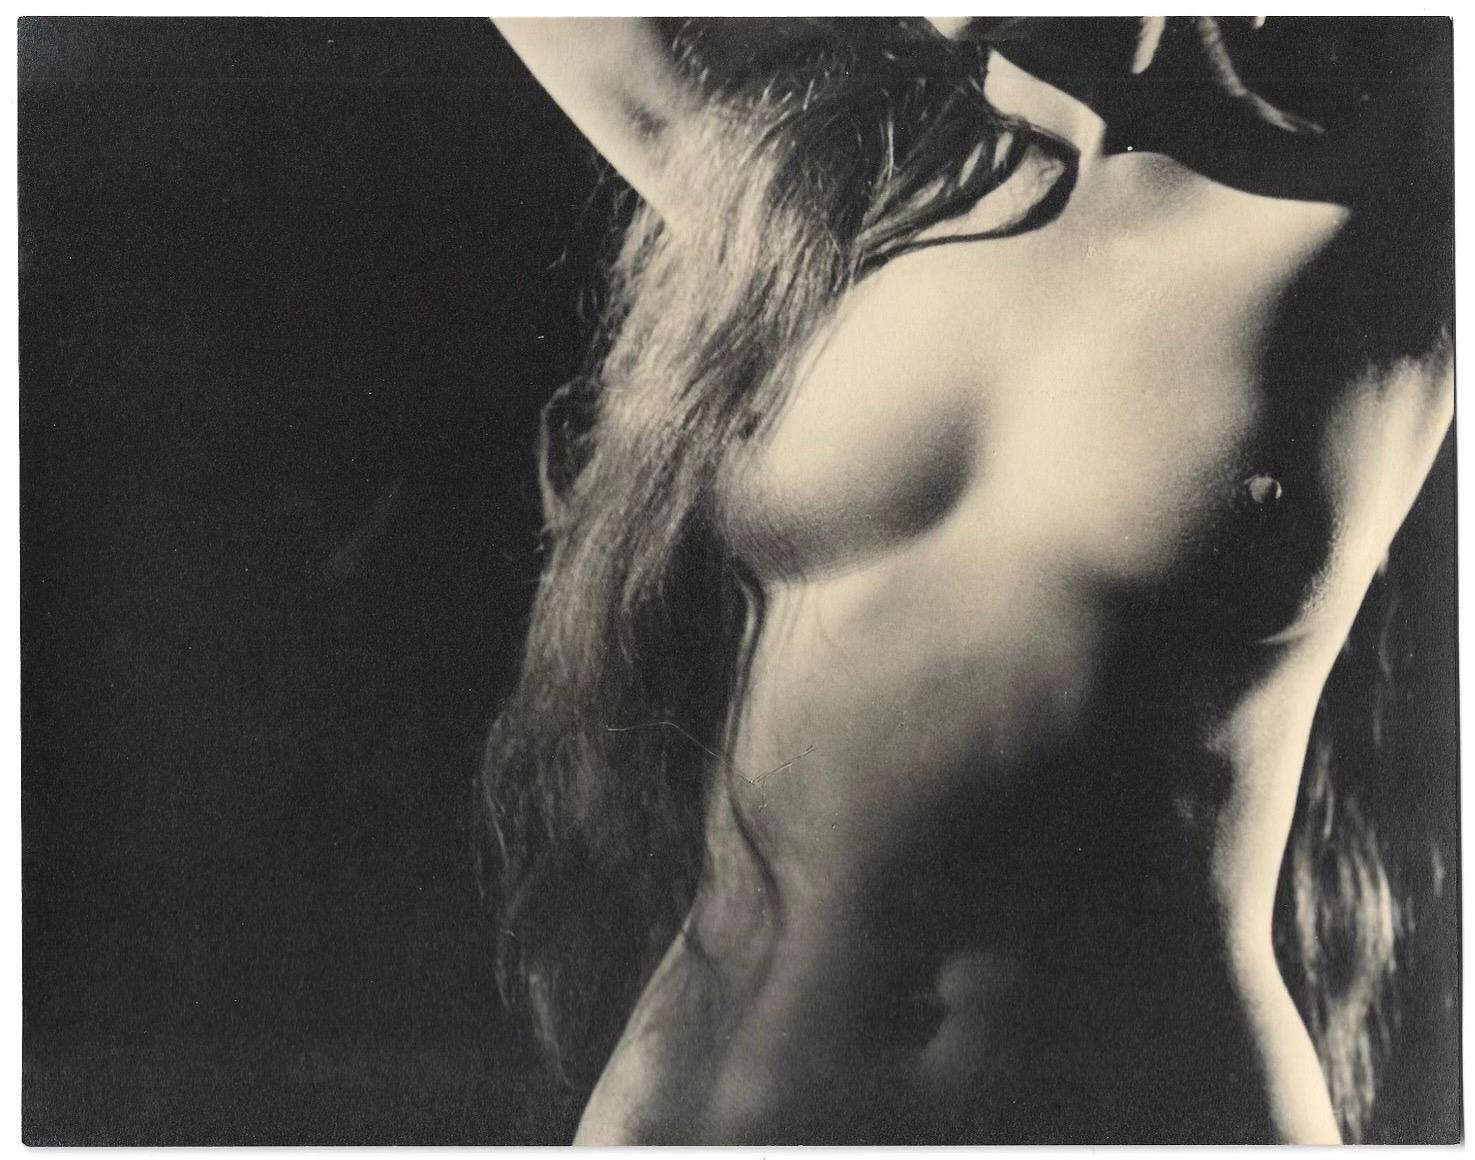 Black & White Photograph of a Female Nude by Contemporary American Photographer For Sale 1